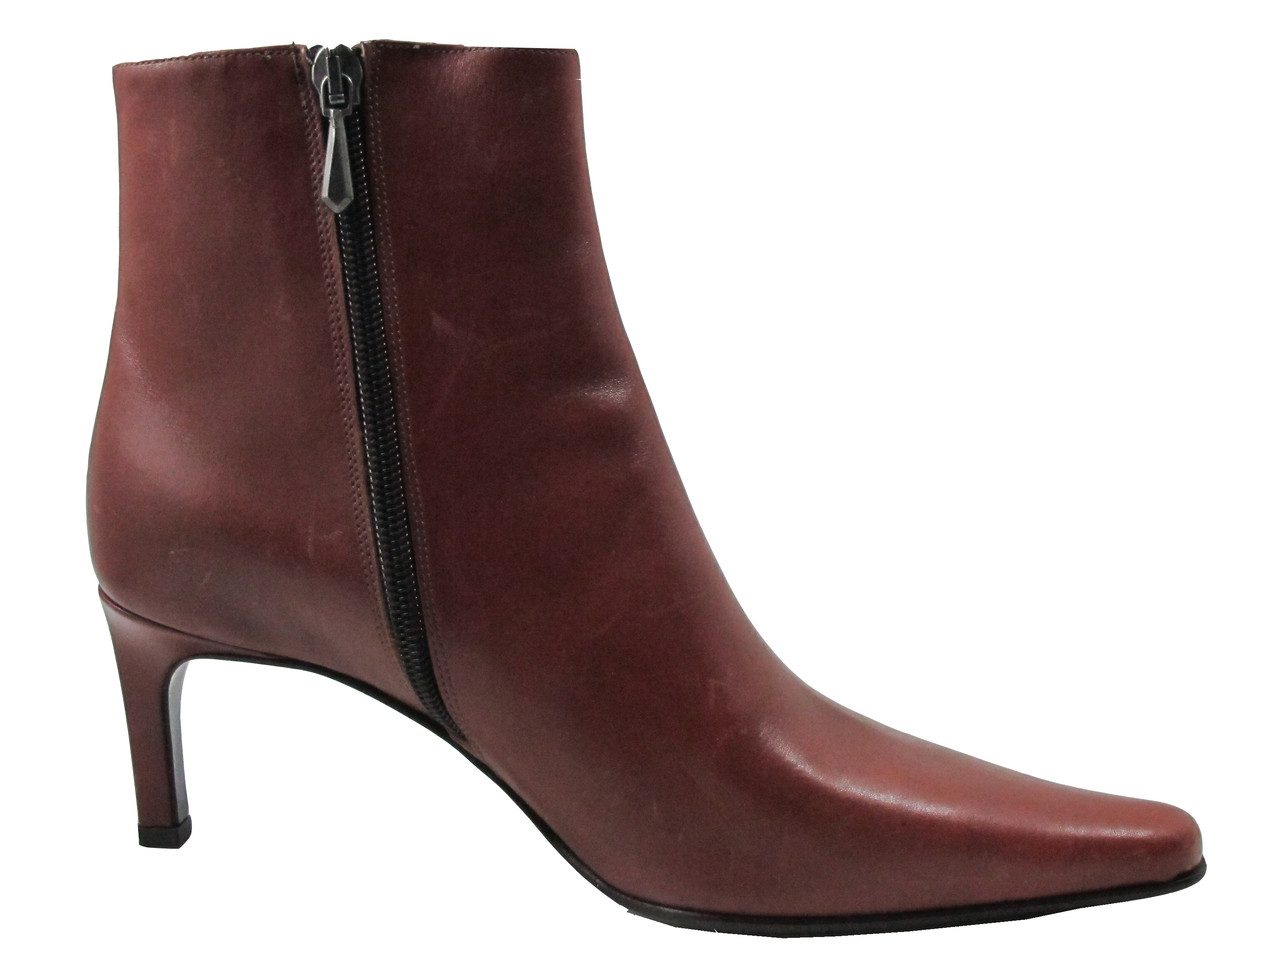 Labeled Da'vinci 4168 Women's Italian Ankle Dressy Snip Toe Boot Details about   Mary 2000 Rt 